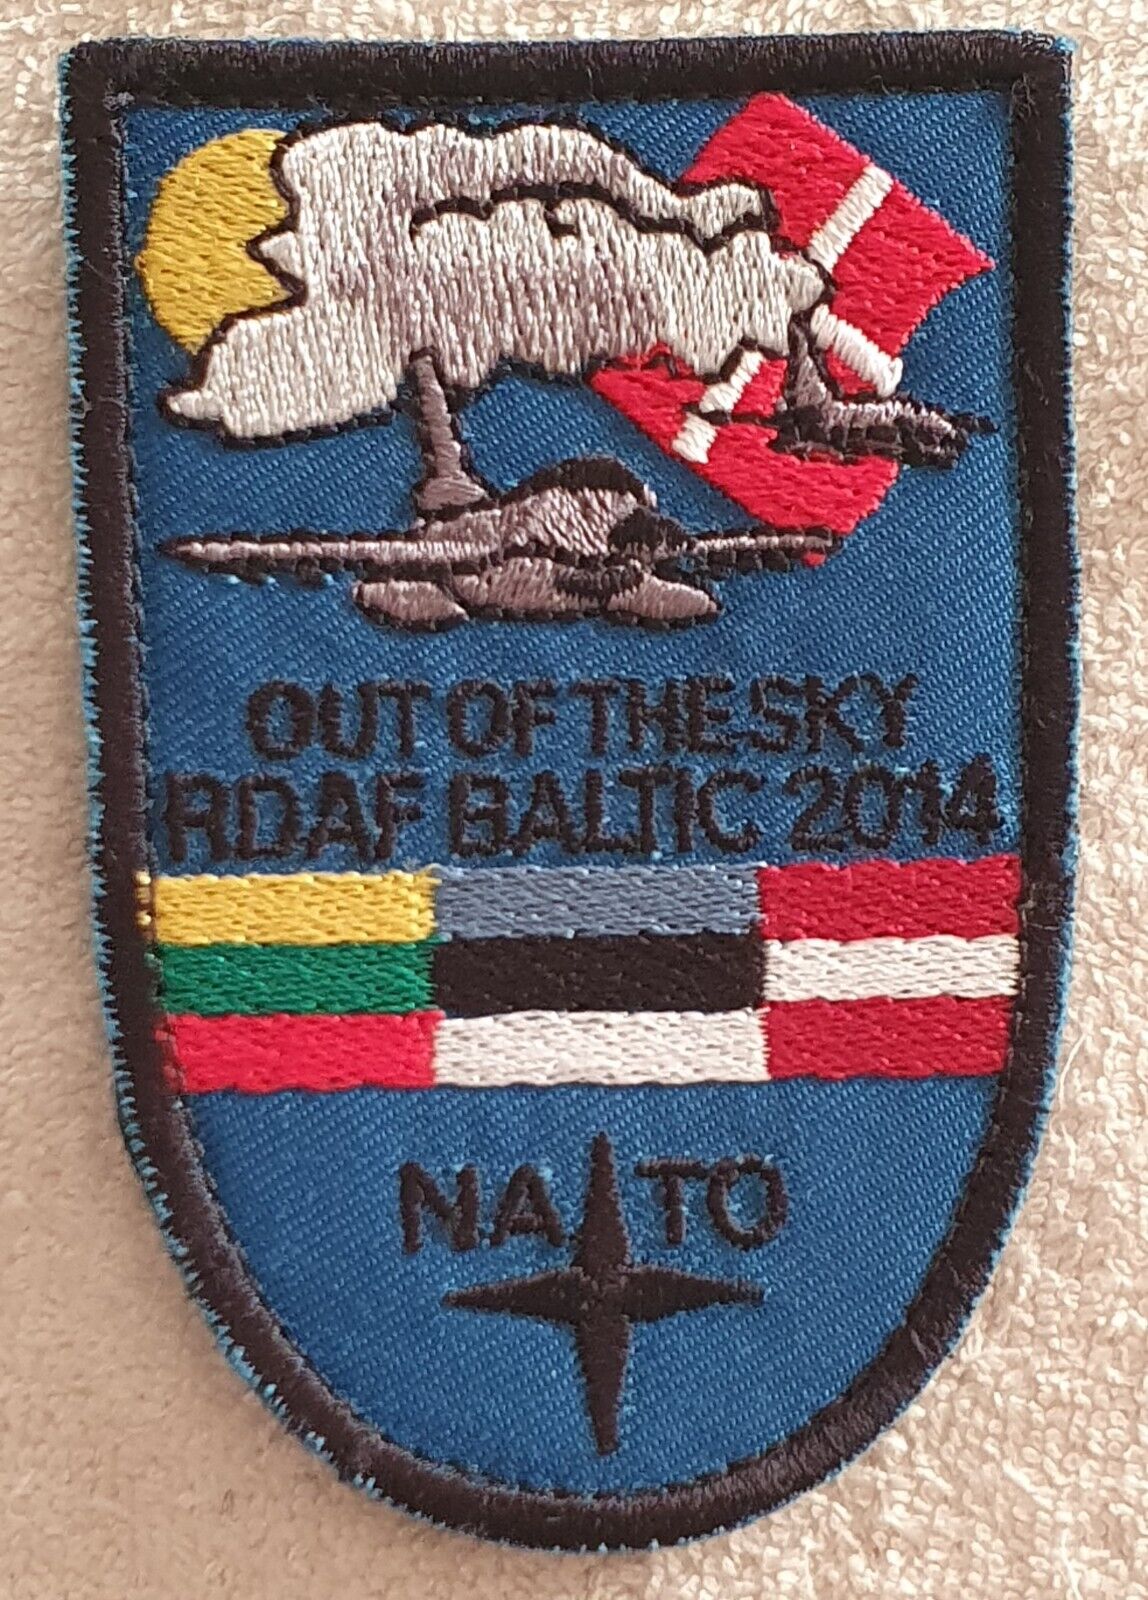 RDAF AIRFORCE NATO BALTIC AIR POLICING 2014 RARE F 16 PATCH 